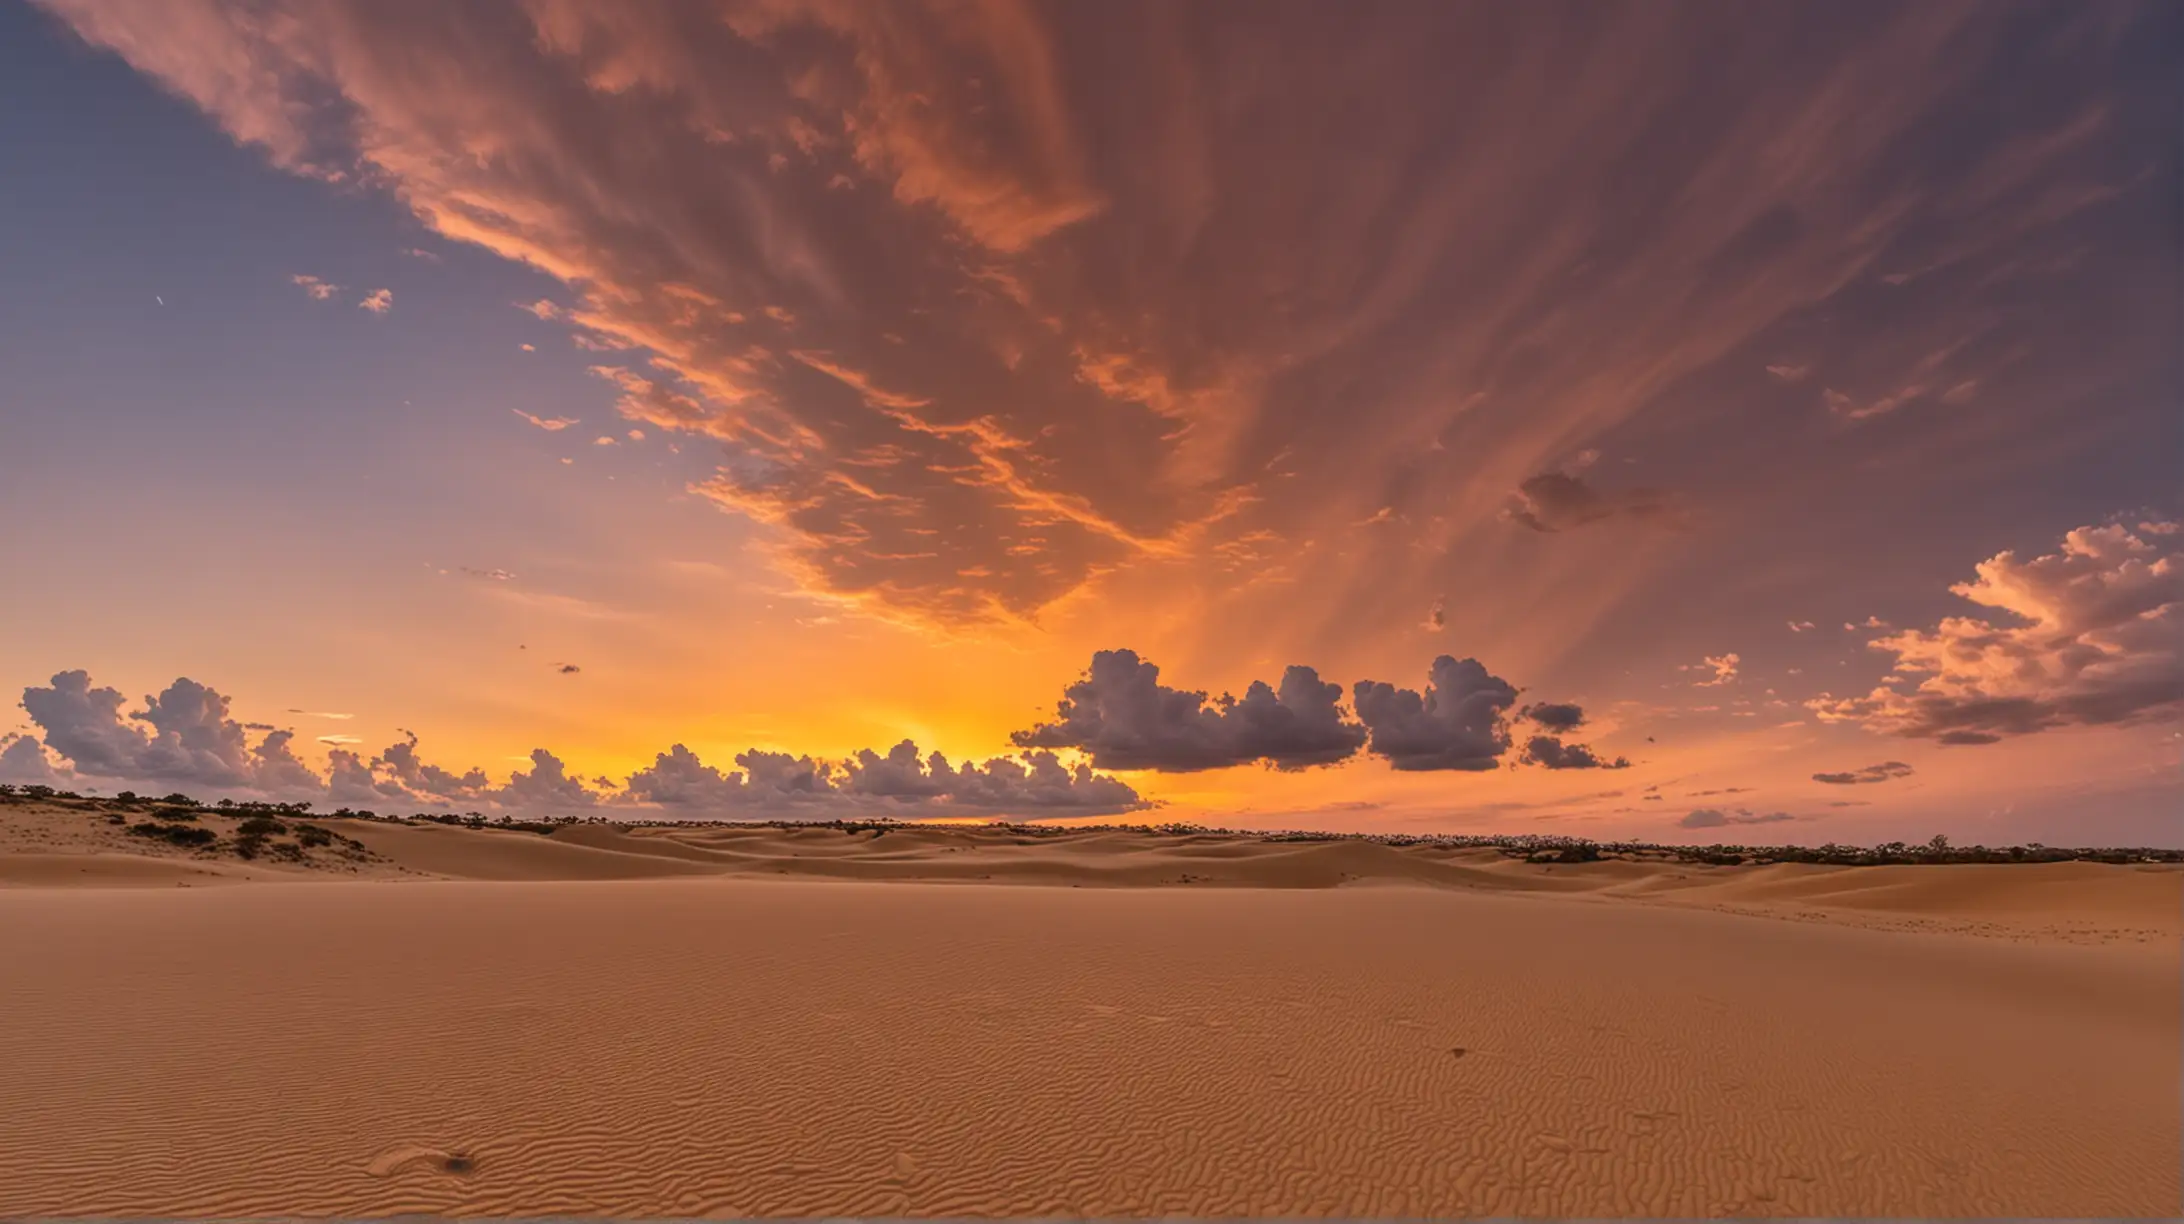 orange sky with clouds and golden sand land, the cloud should be in total 95% of the image from top to bottom and land should be only 5% visible remaining should be covered by clouds in sky